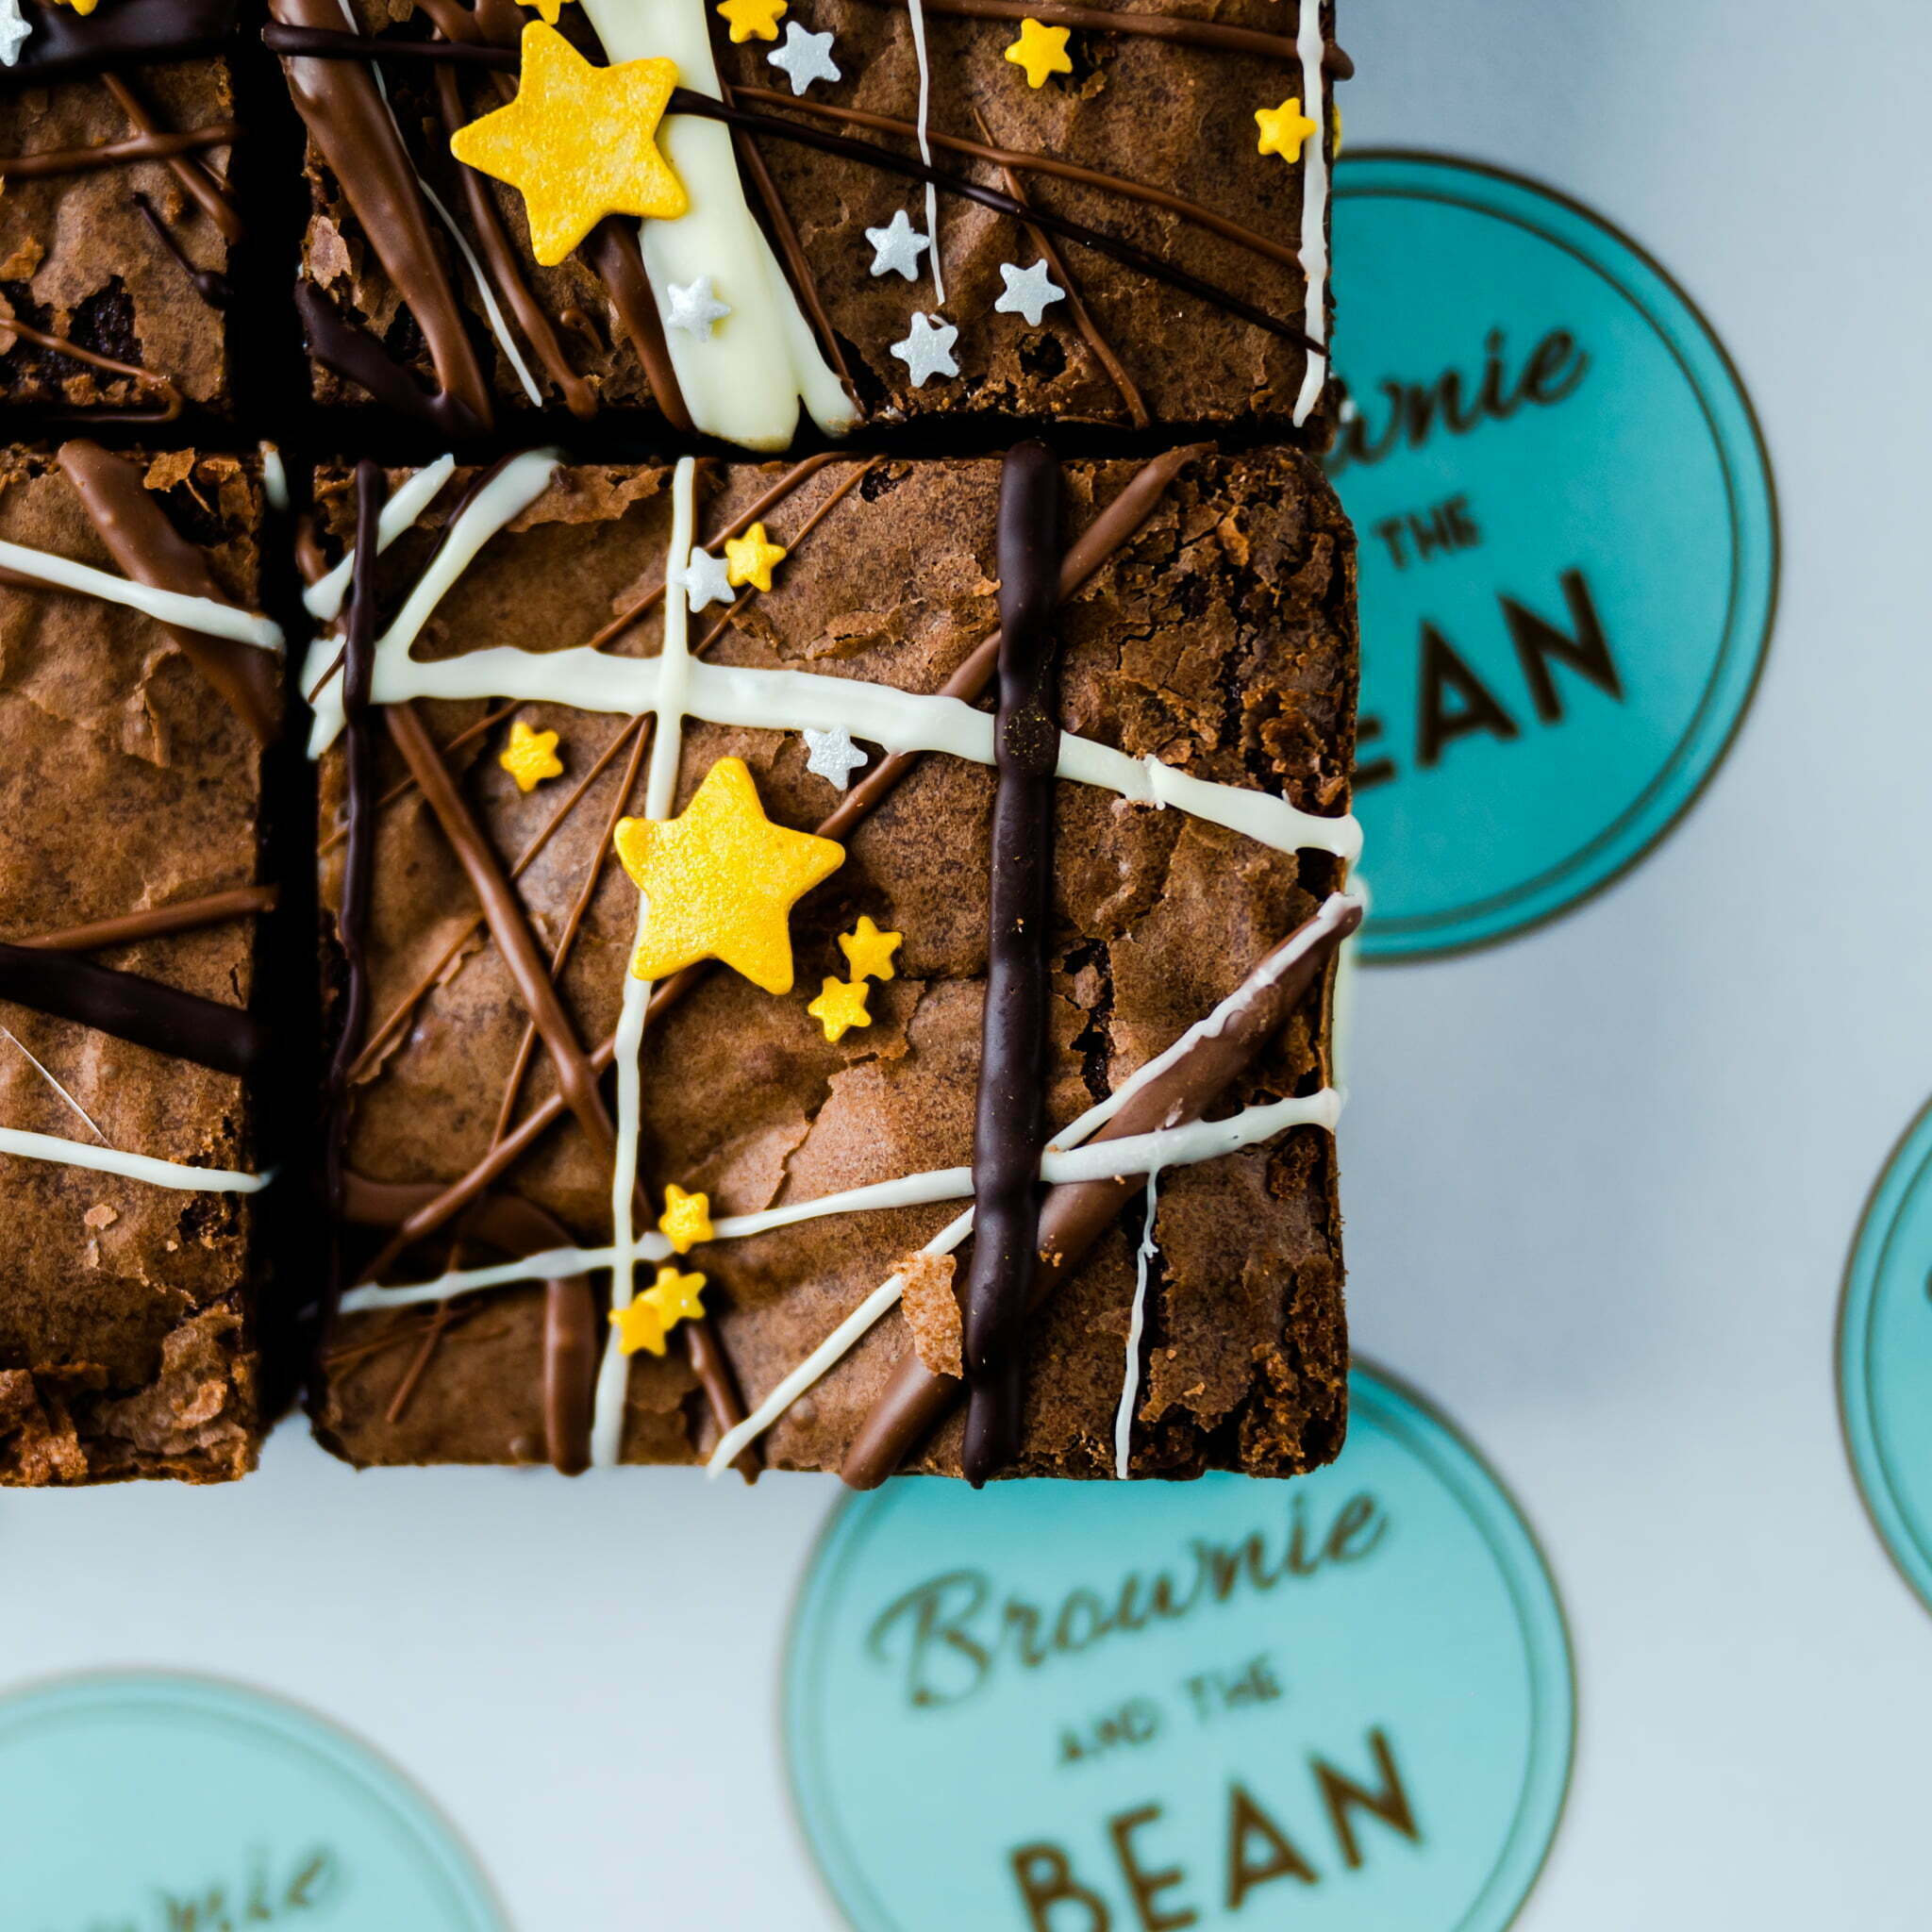 Father's Day brownies on a branded greaseproof. The brownies have spashes of white and dark chocolate on them and gold and silver stars in different sizes.